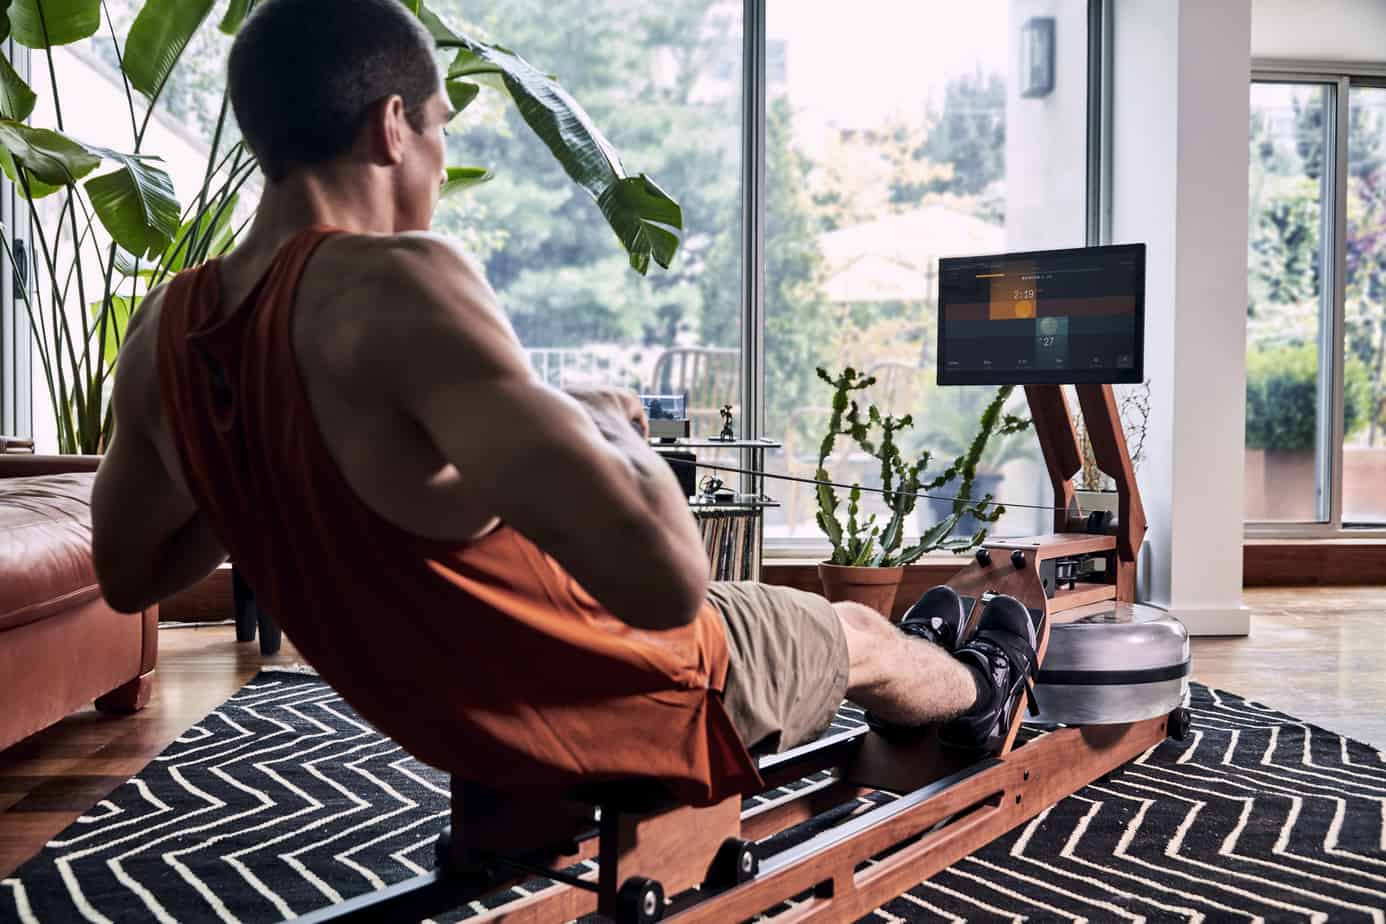 back view of man using the Ergatta rower